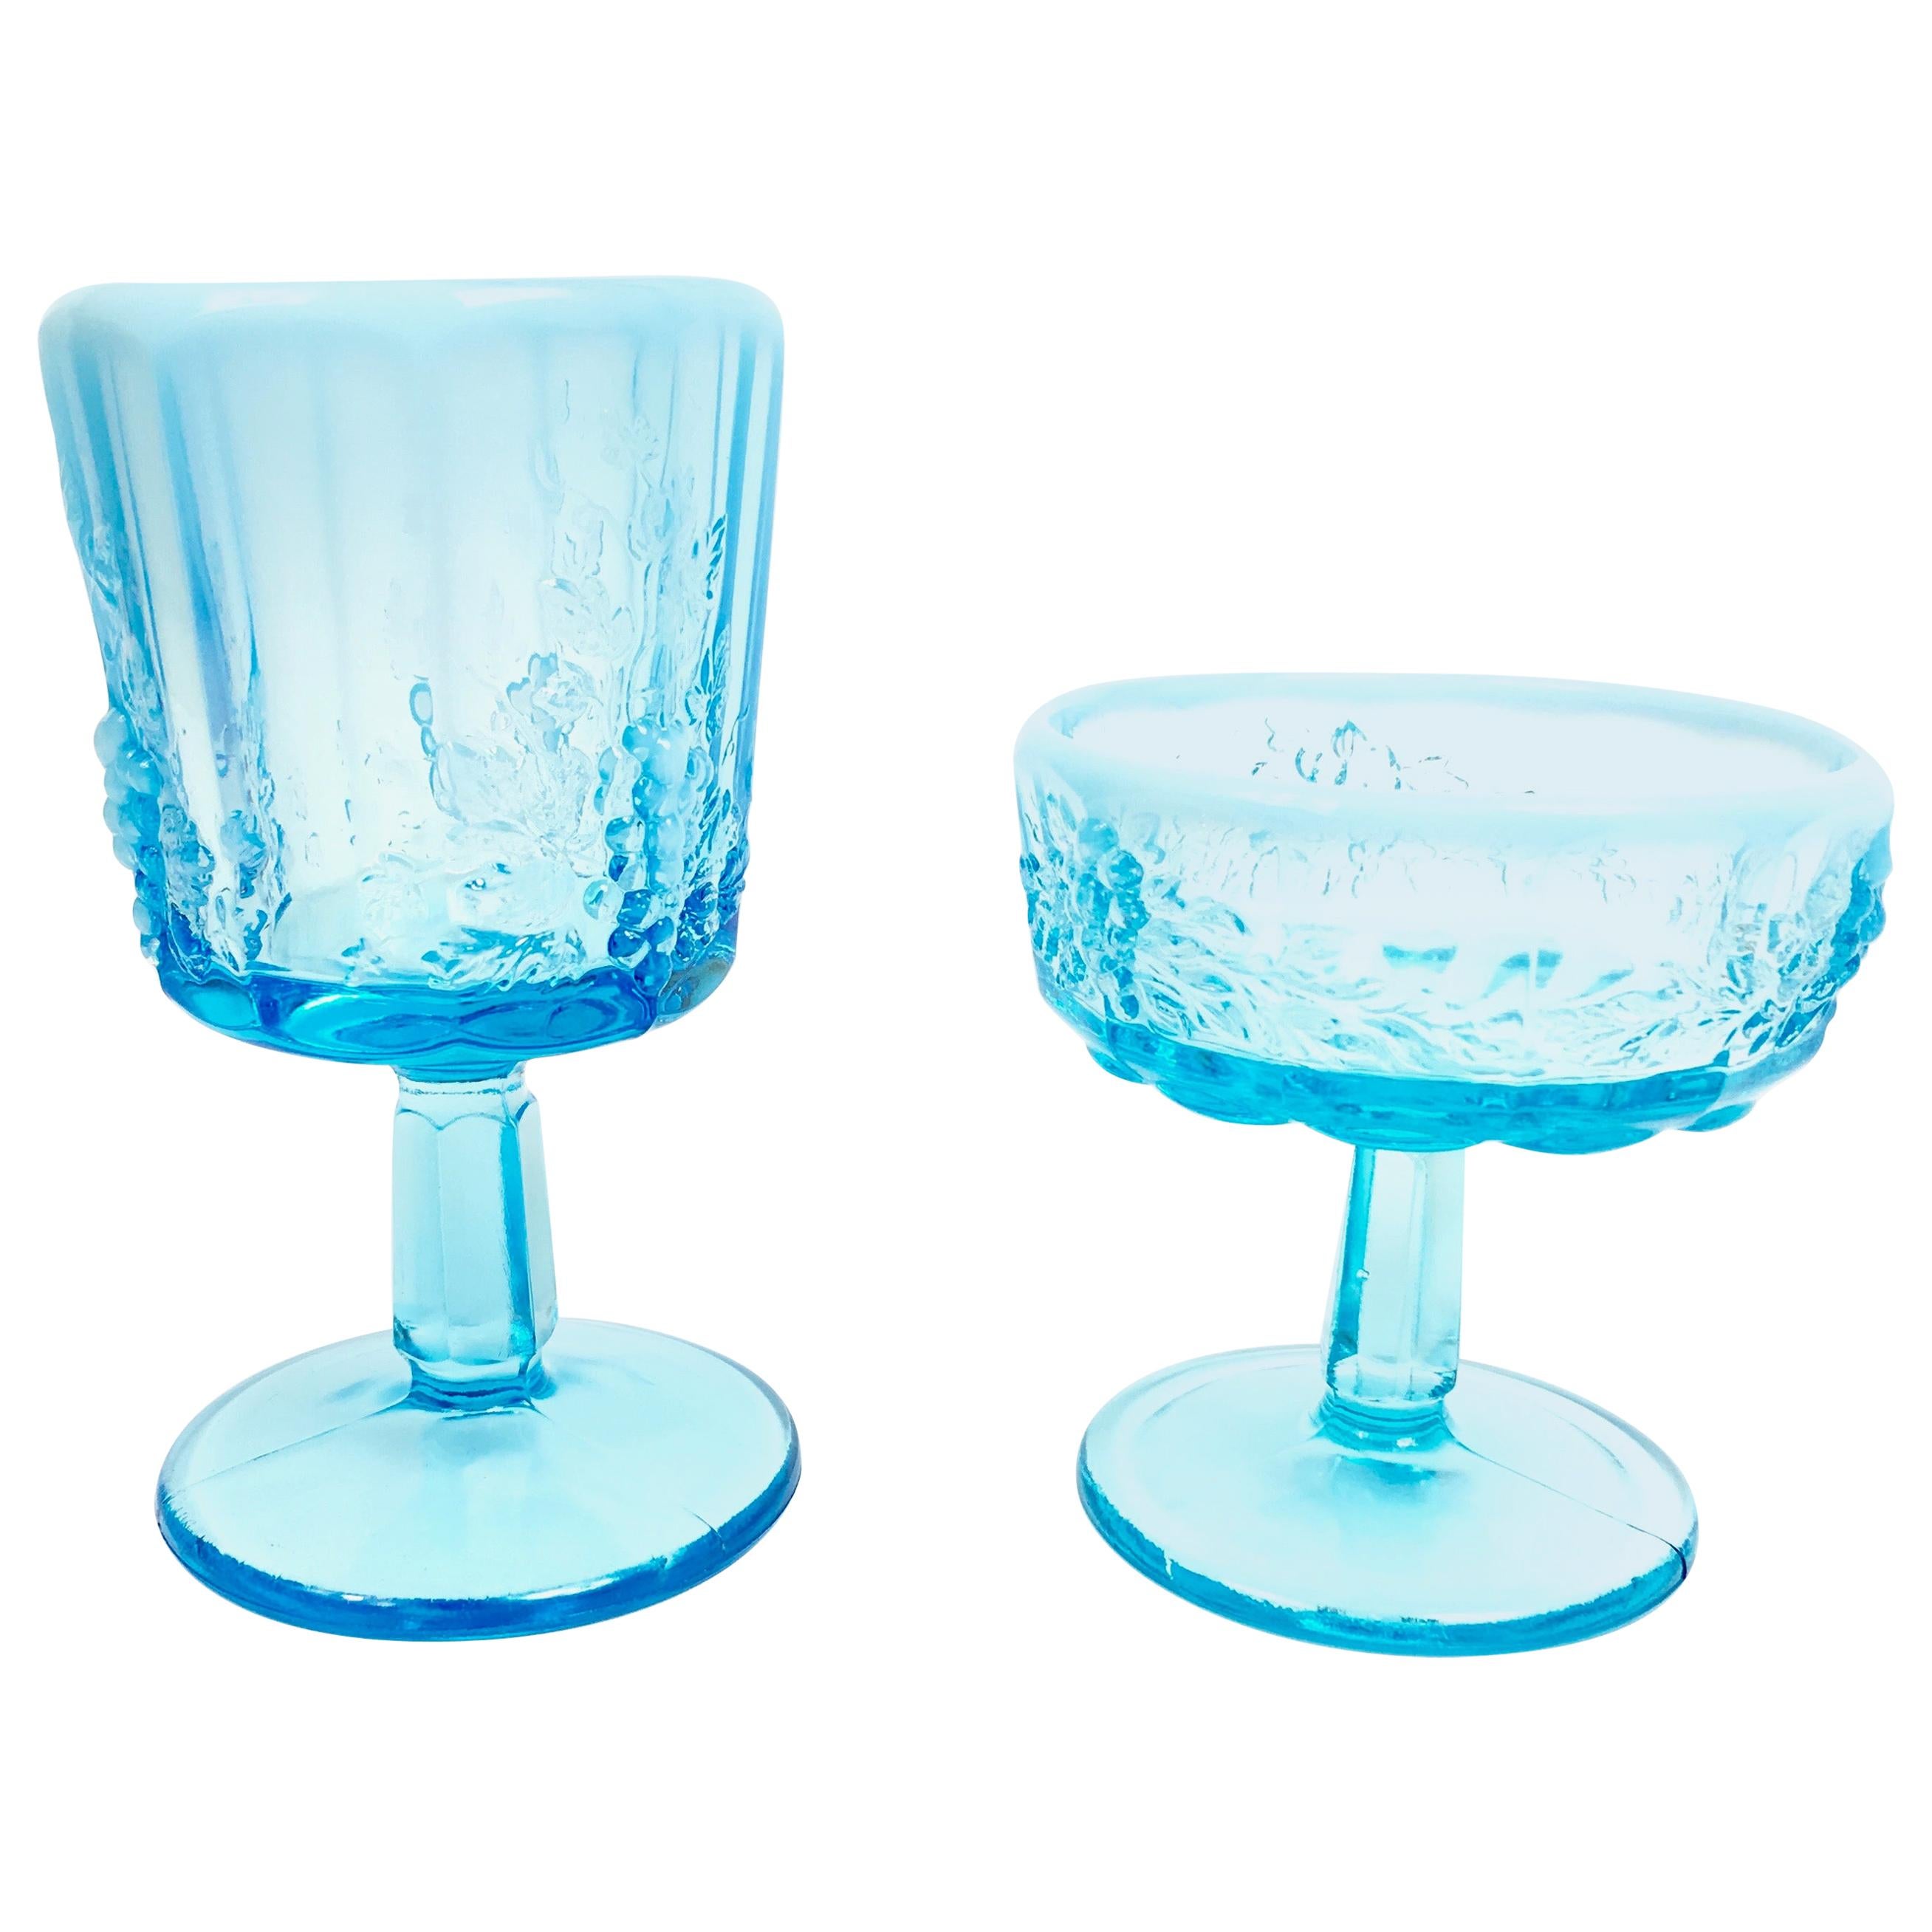 Vintage blue glass goblet from Europe